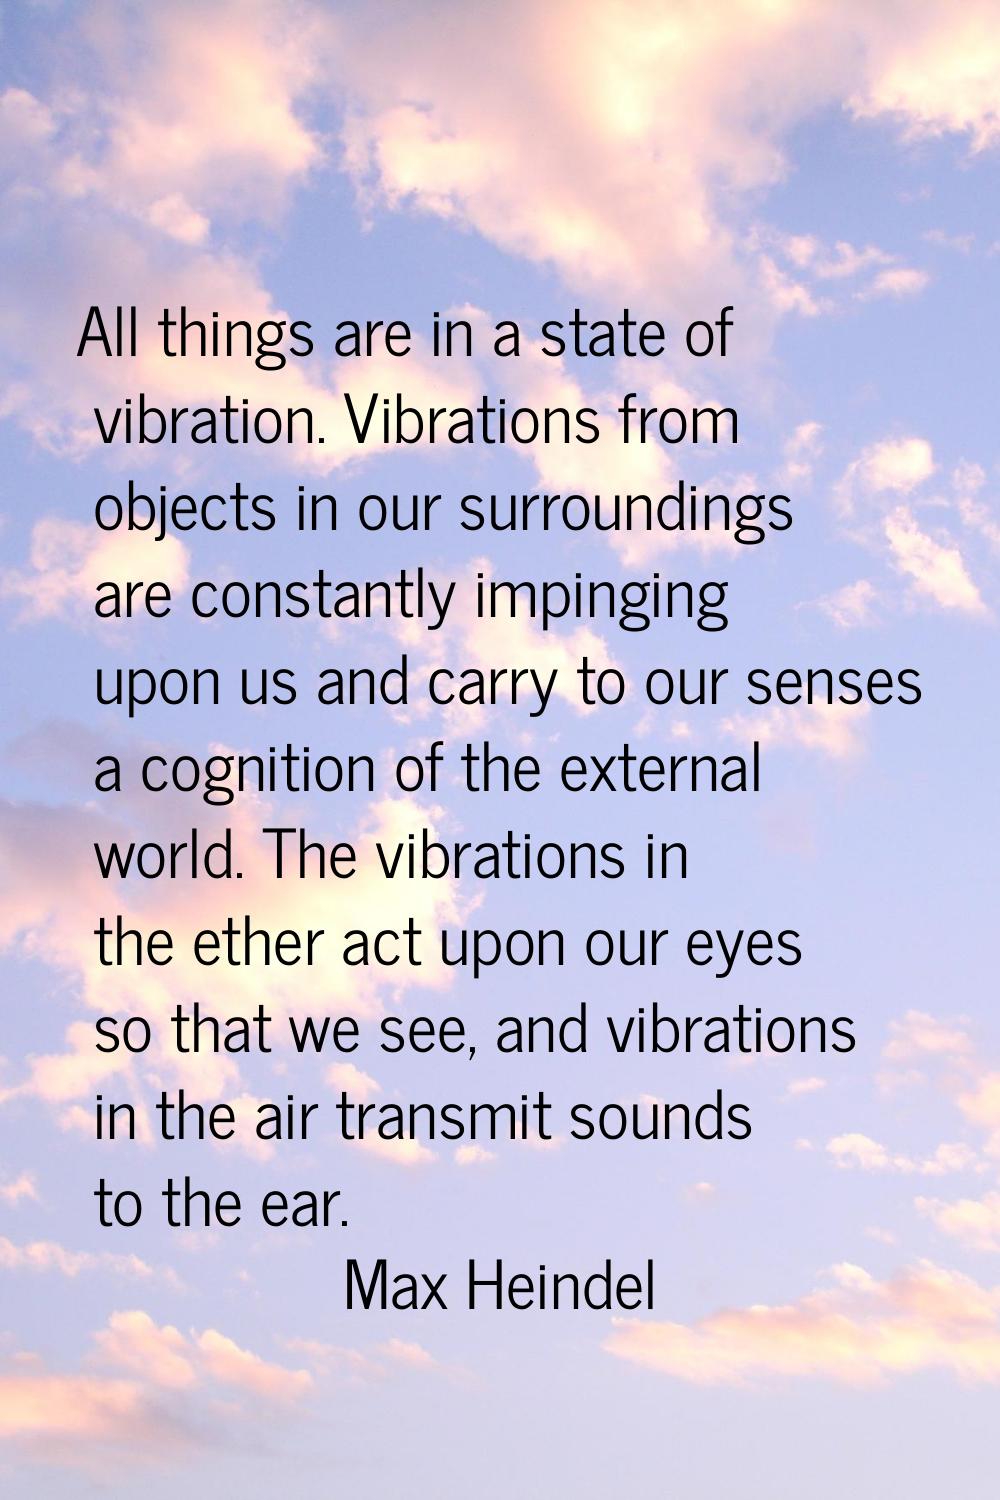 All things are in a state of vibration. Vibrations from objects in our surroundings are constantly 